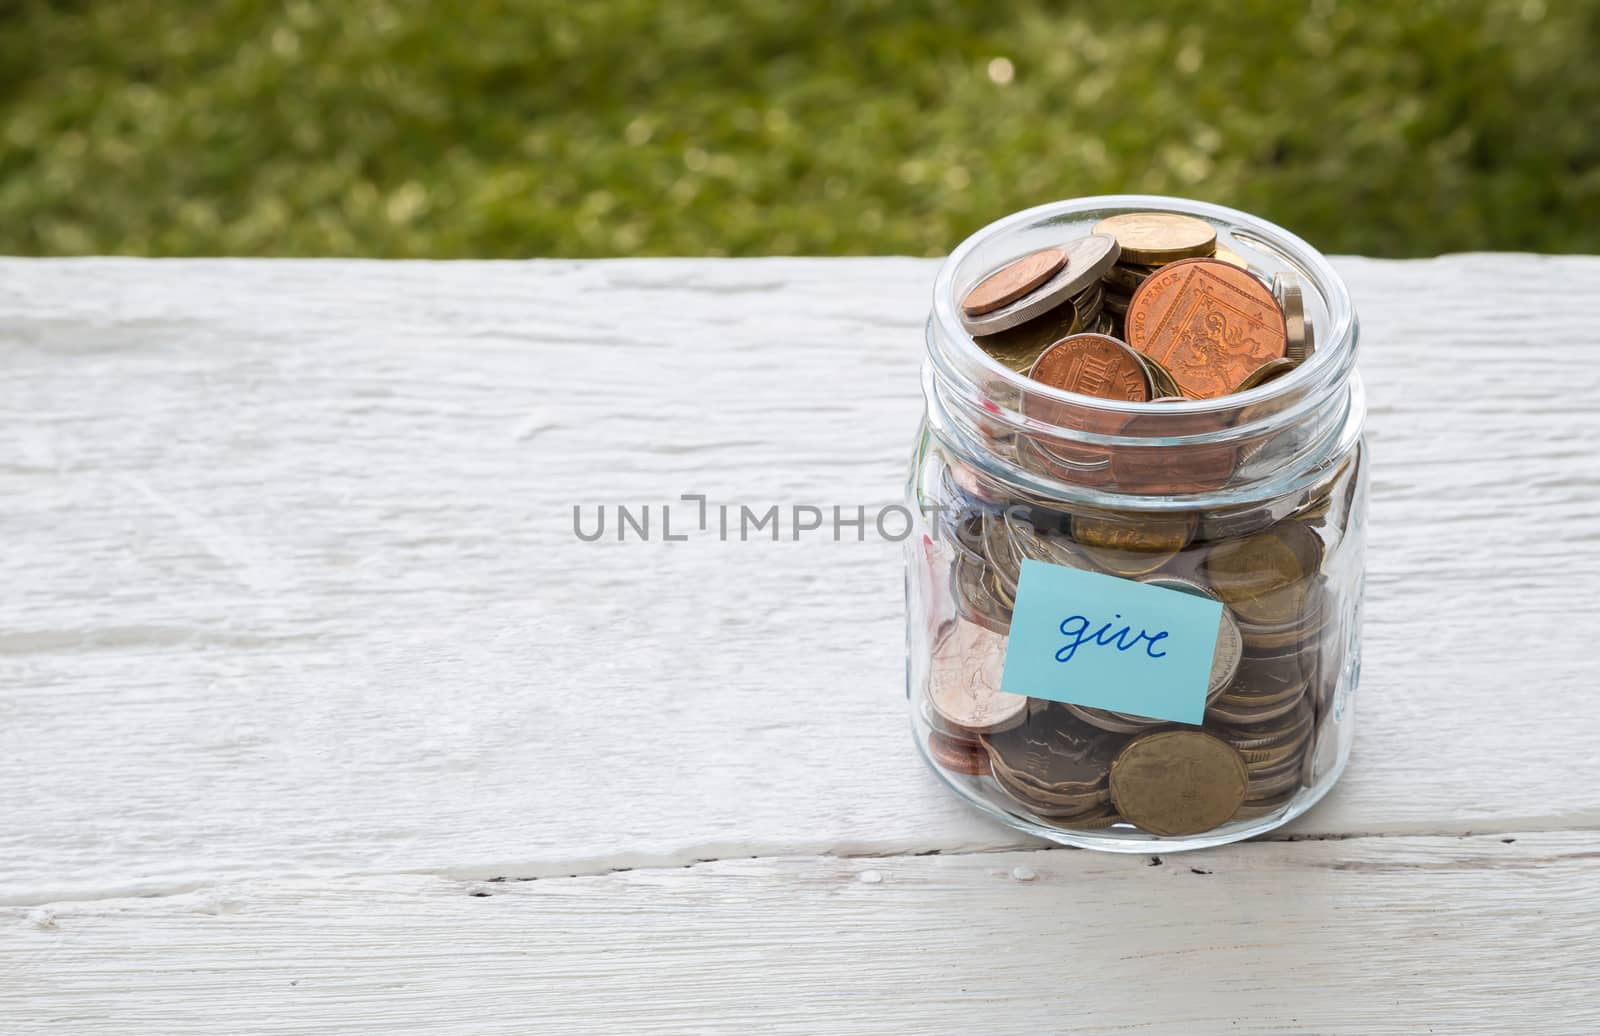 Give money to charity by vinnstock